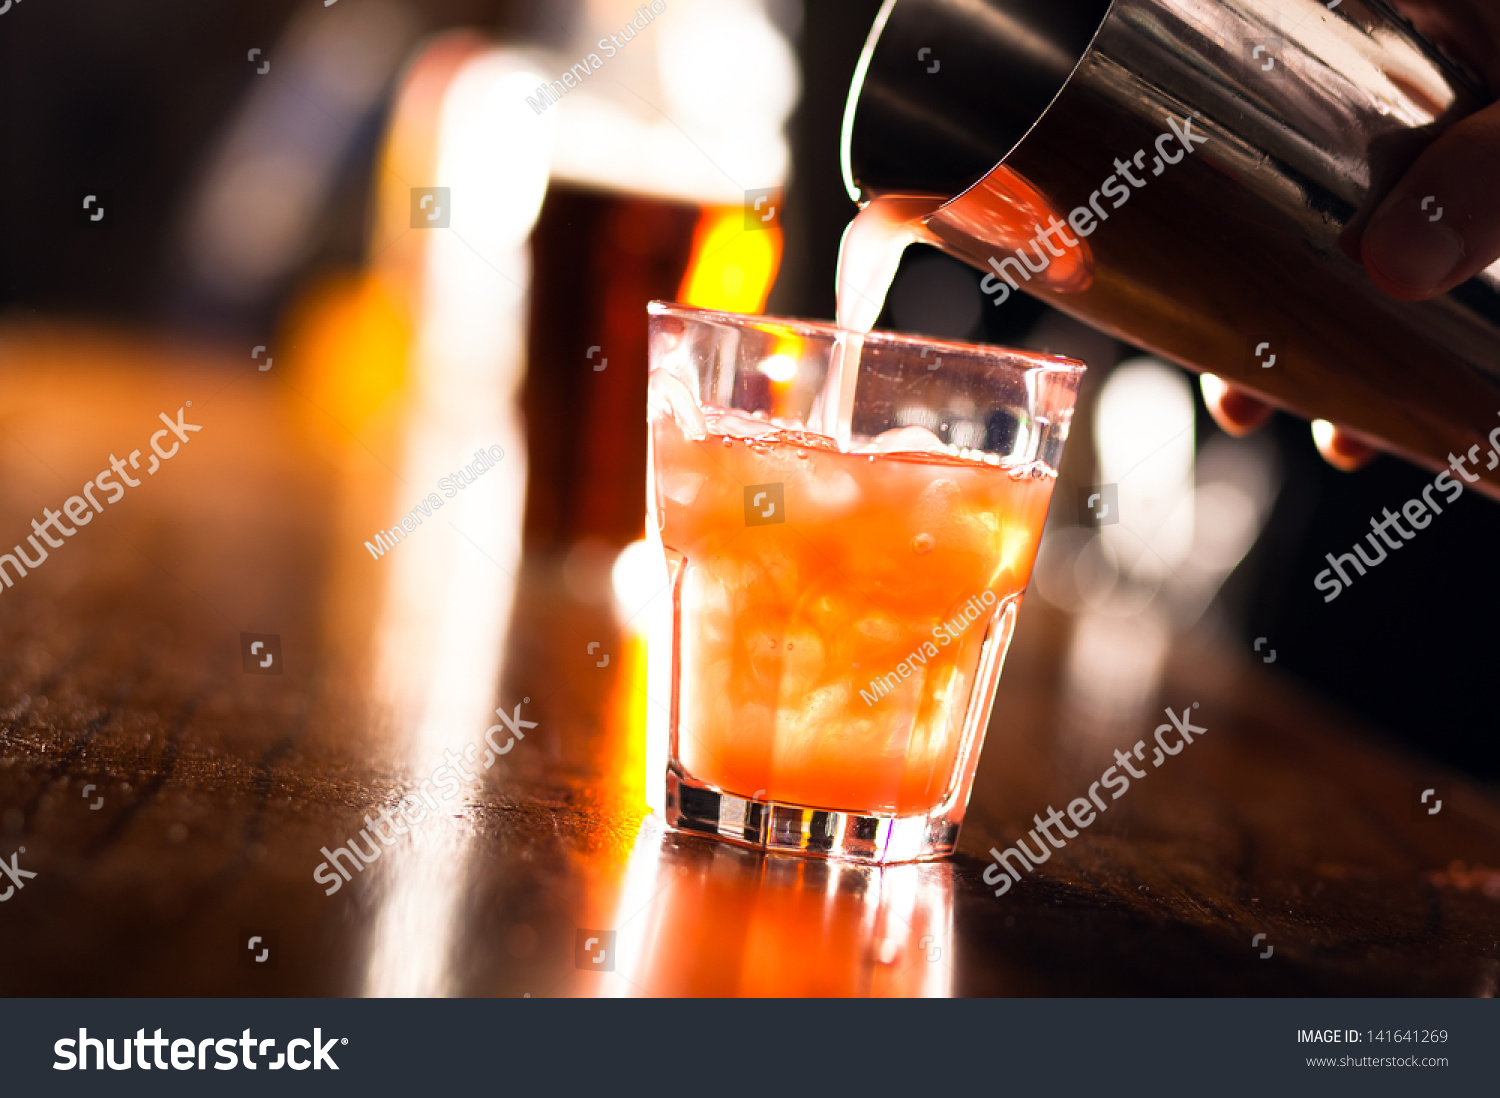 Barman pouring a cocktail into a glass  #141641269